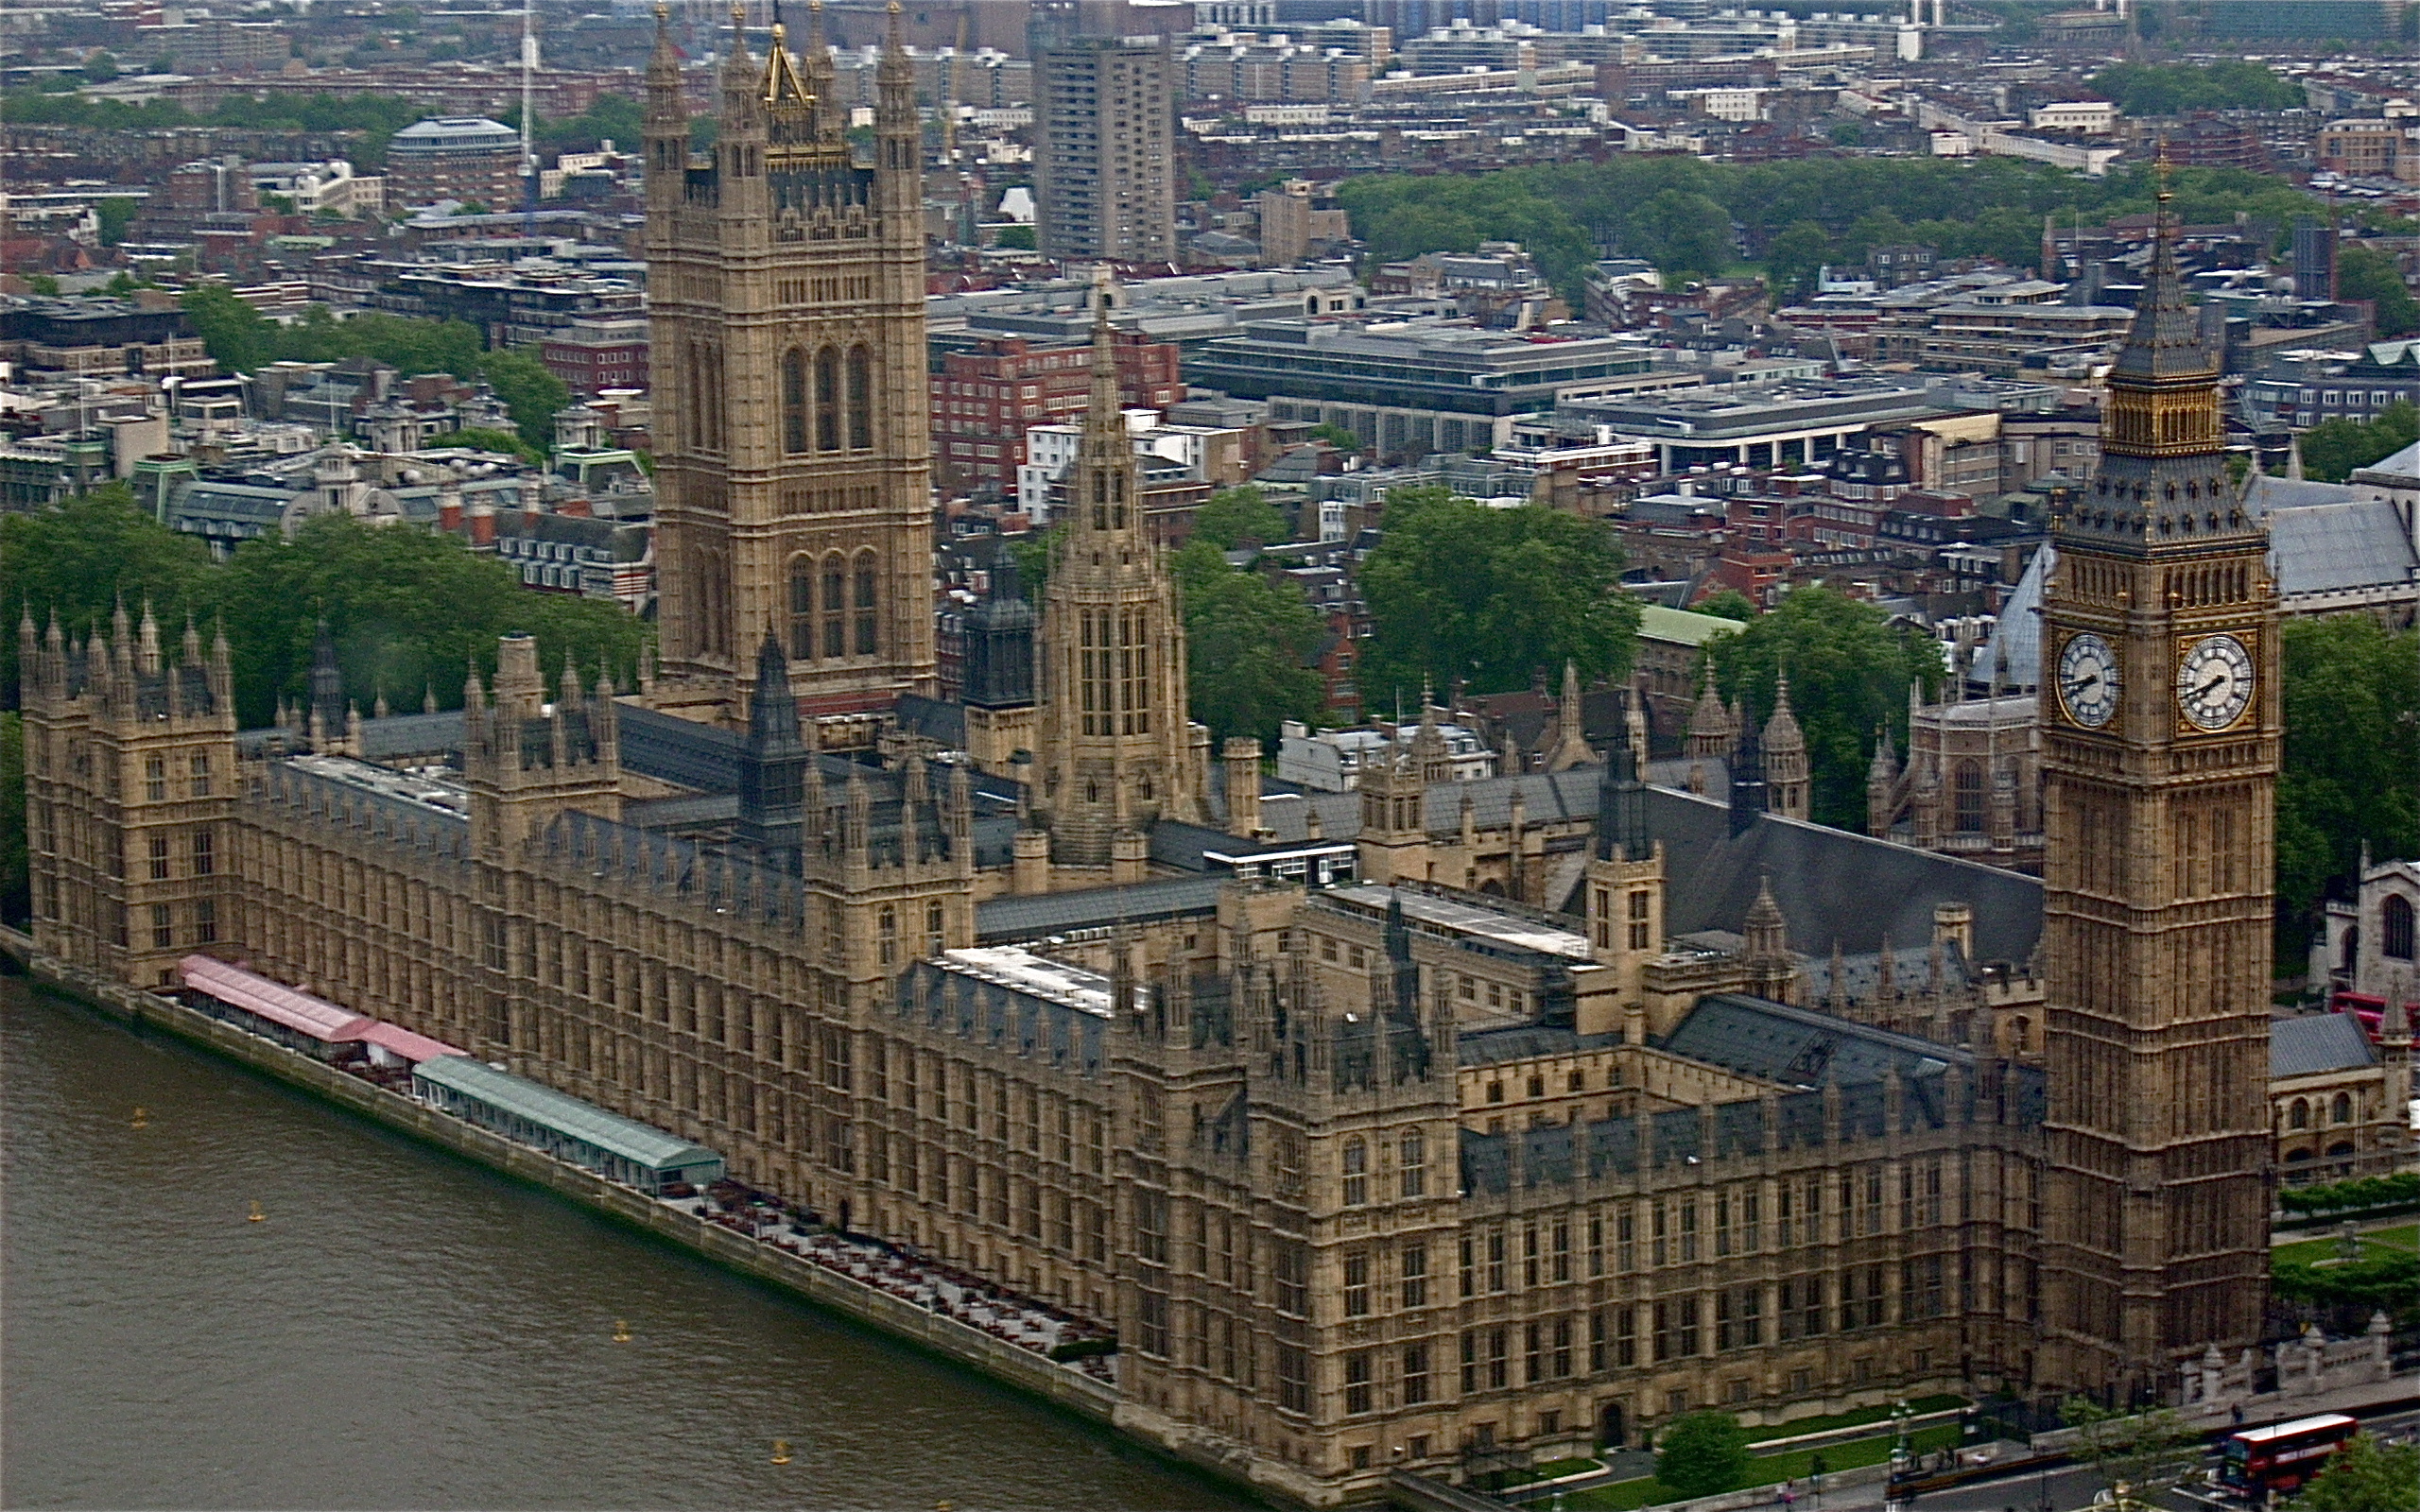 palace of westminster, palaces, man made